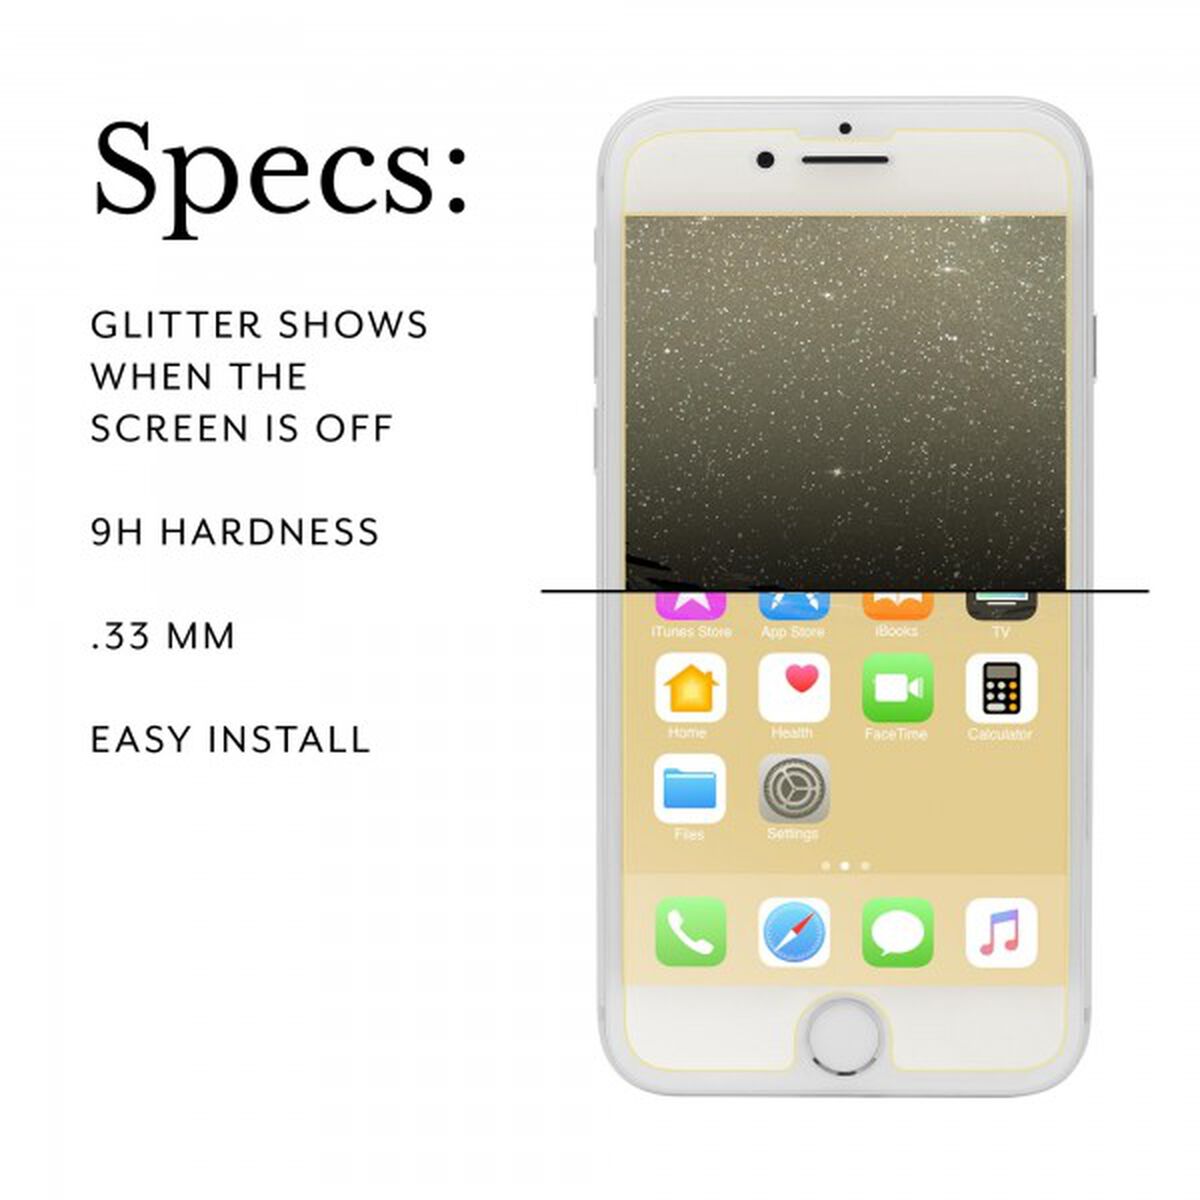 Showtime Glitter Glass (Gold) for Apple iPhone 6/6s/7/8 Plus